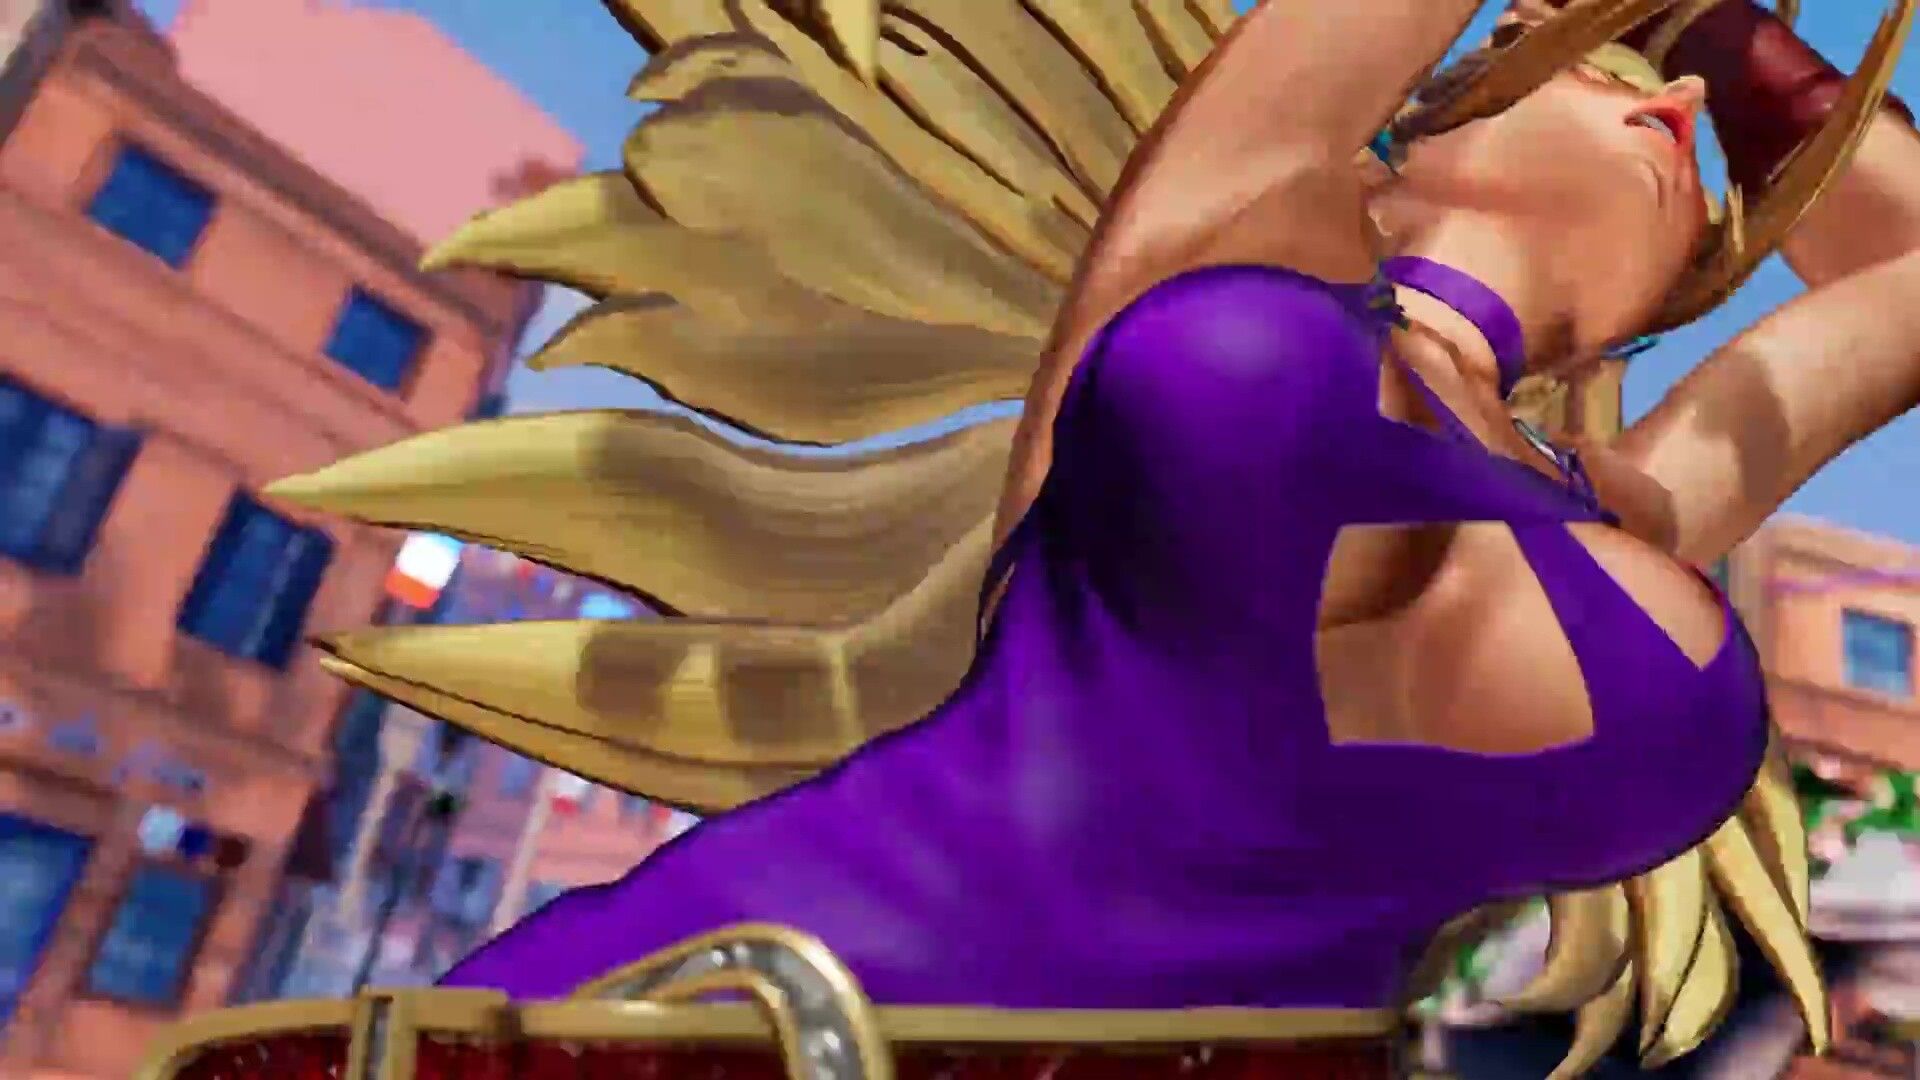 THE KING OF FIGHTERS XV B. Jenny enters the DLC in an erotic dress with and rounded thighs 16